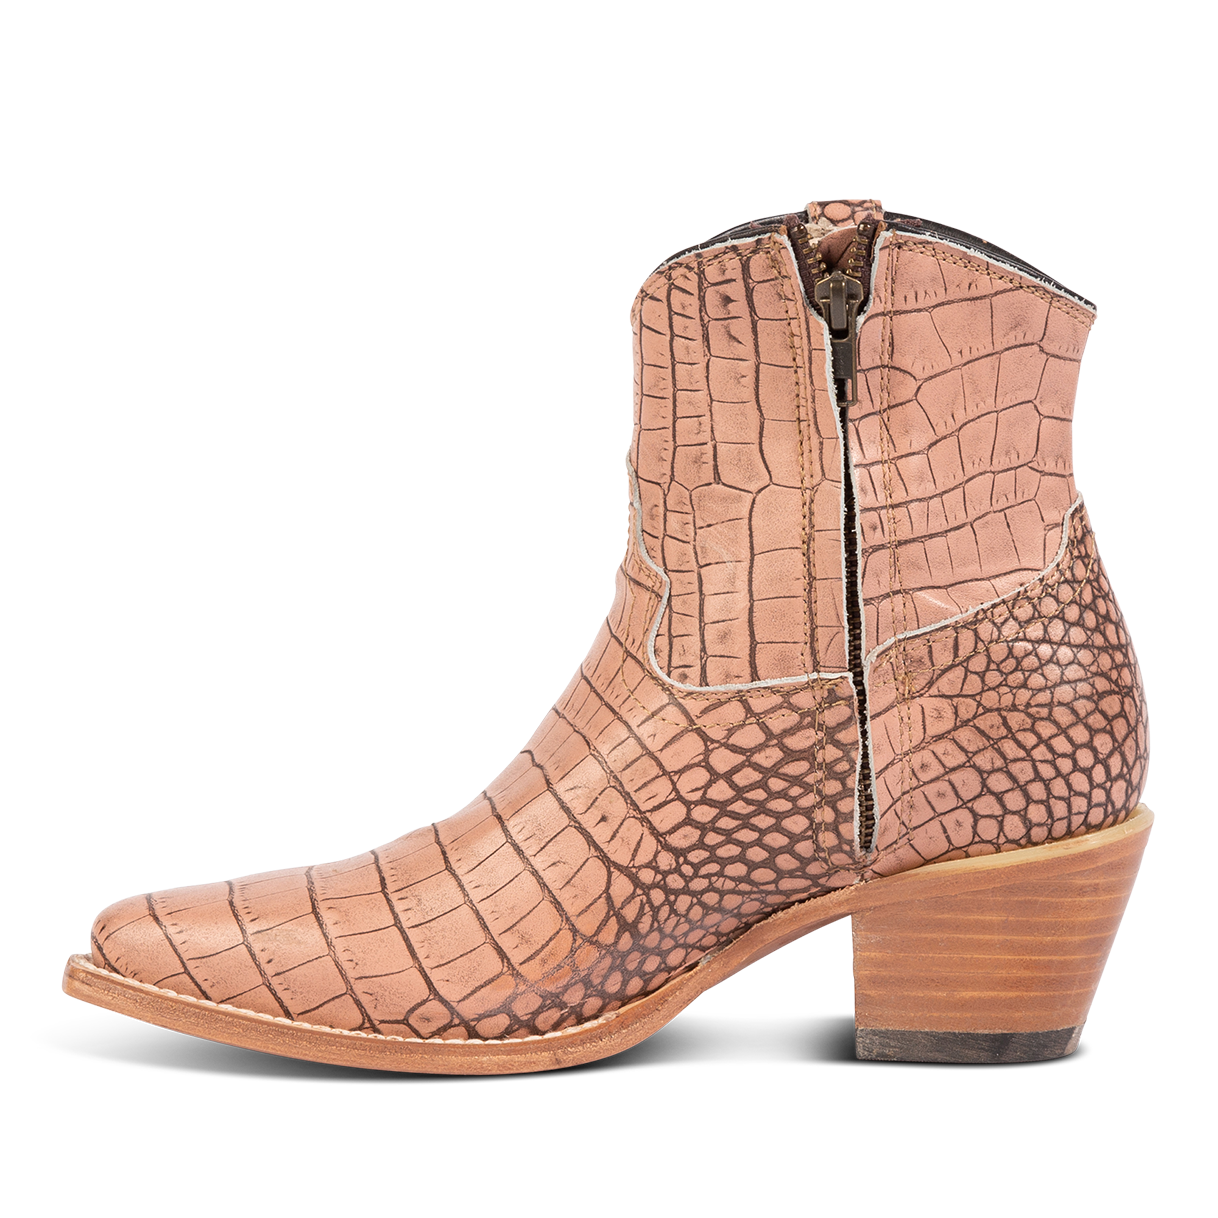 Inside view showing working brass zip closure with red leather pull tab on FREEBIRD women's Miramar blush croco ankle bootie